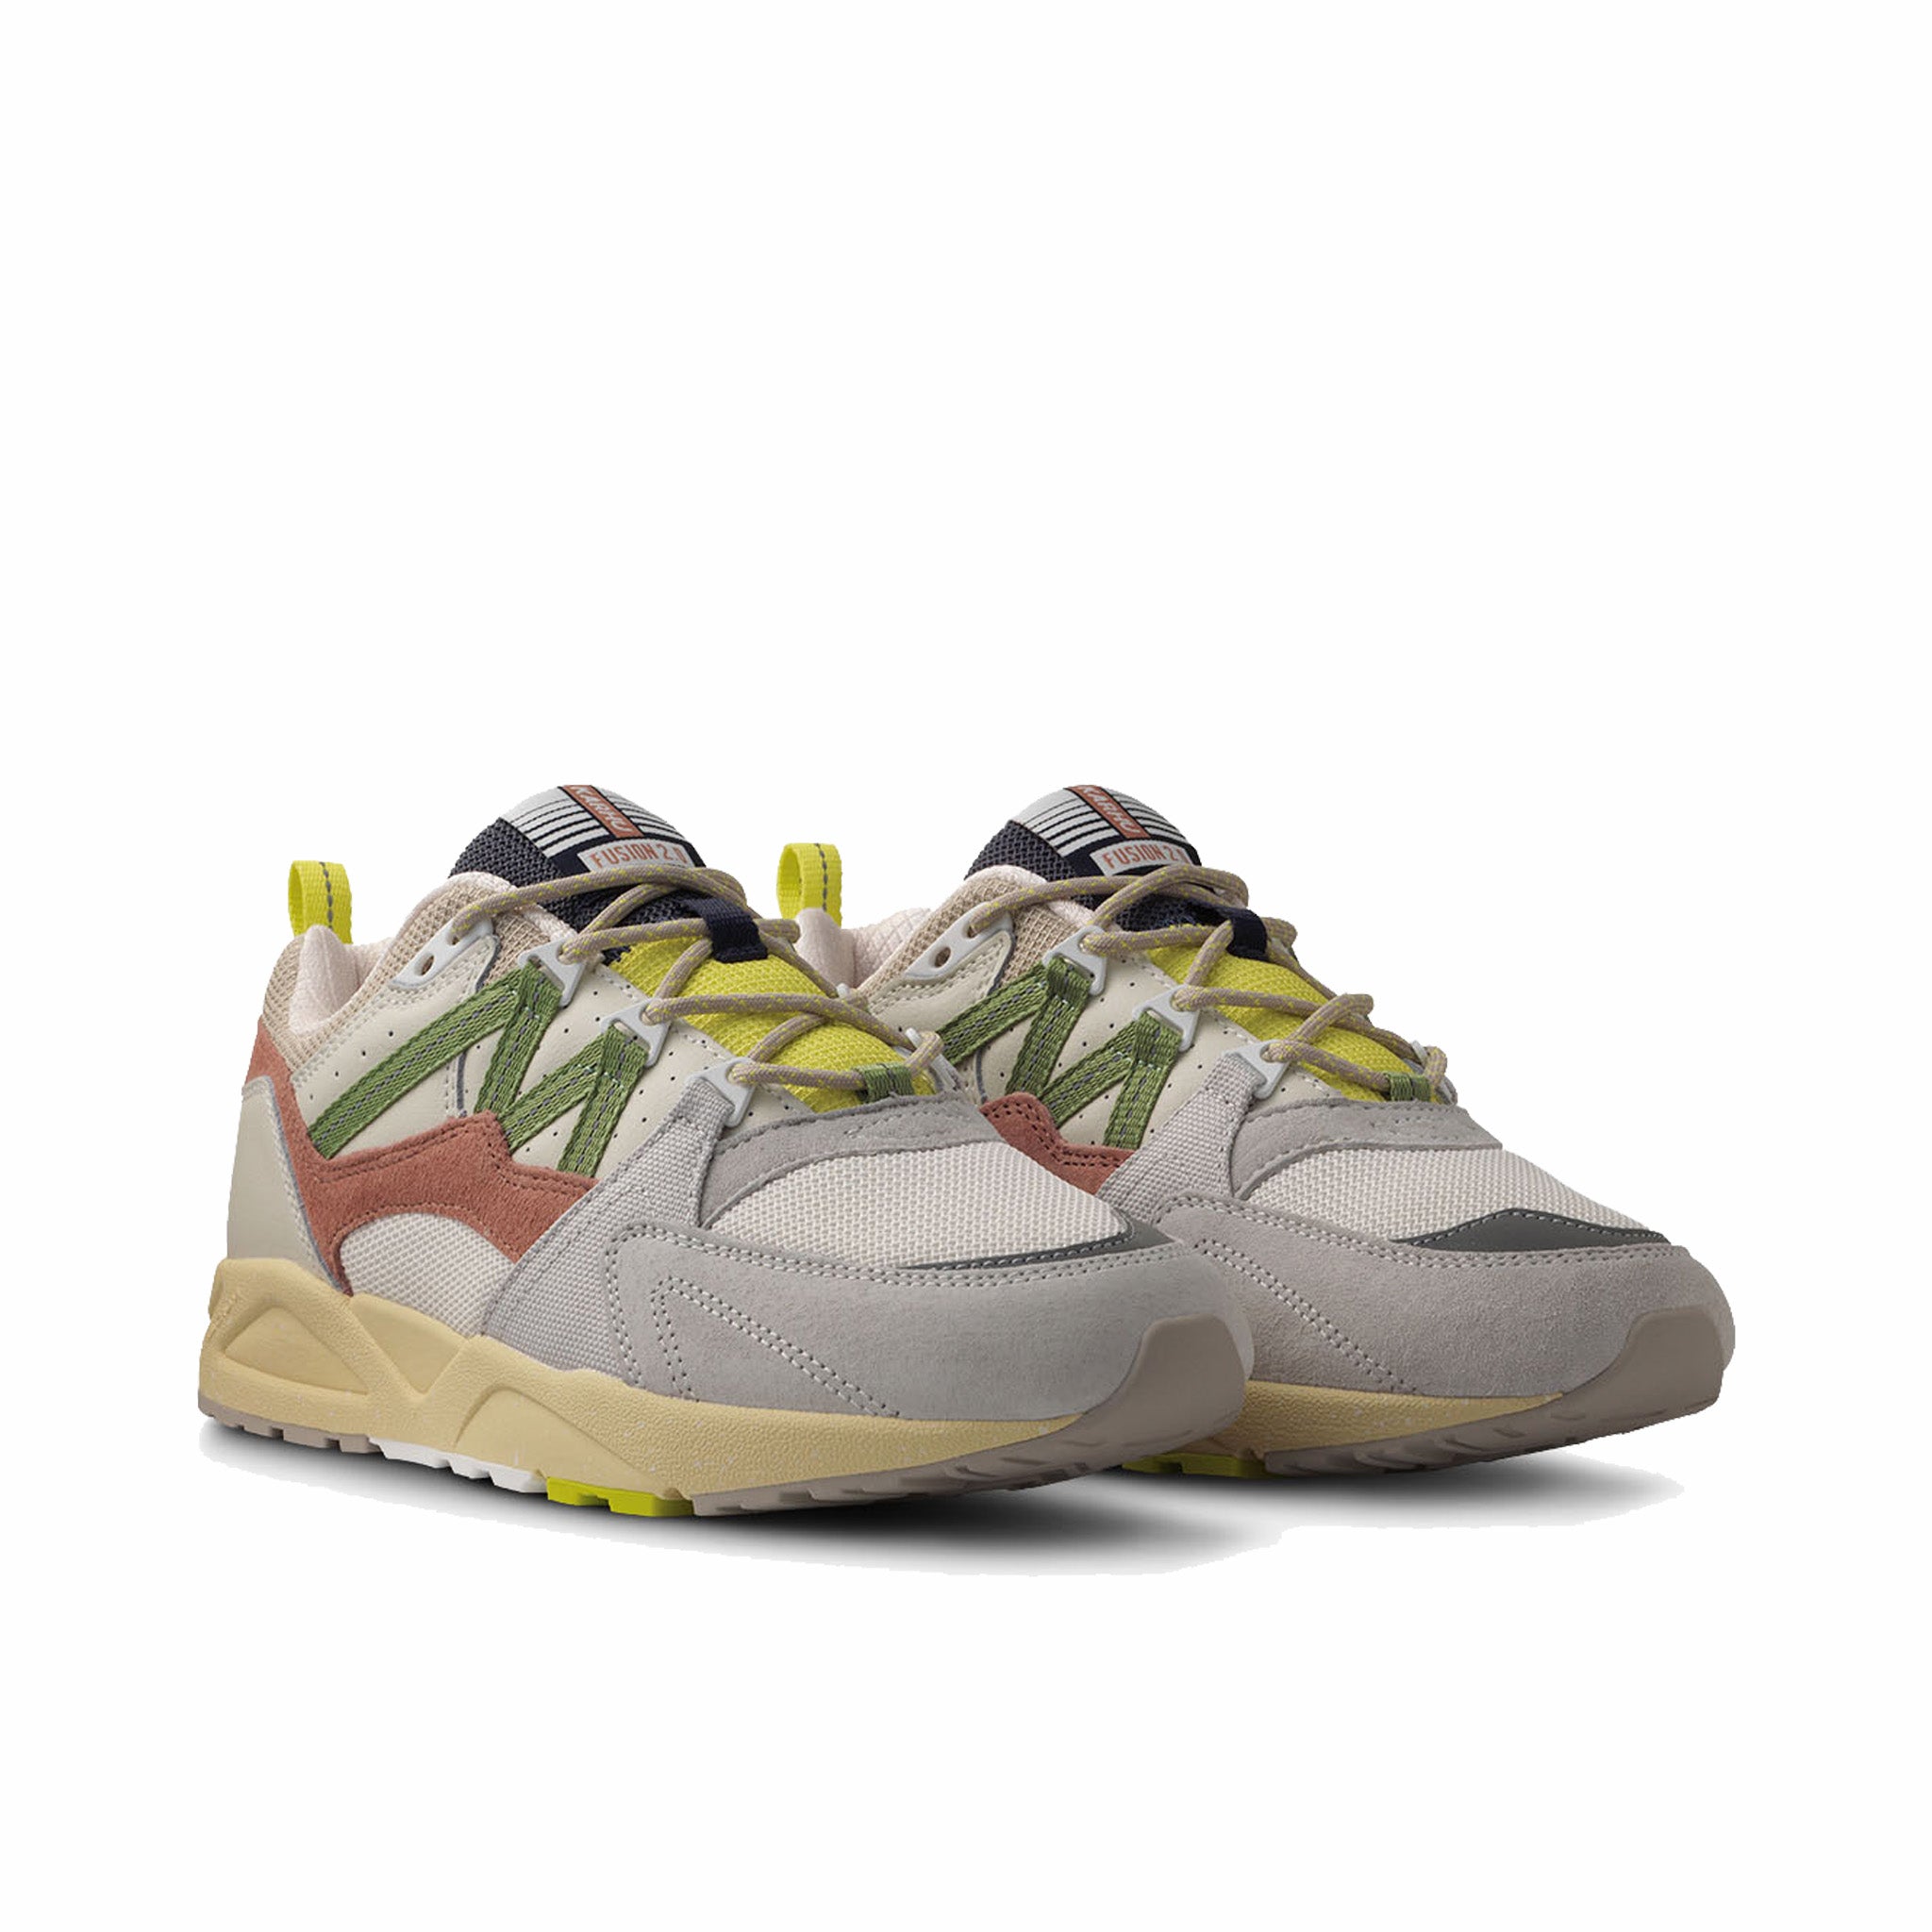 Karhu Fusion 2.0 (Lily White/Piquant Green) - August Shop